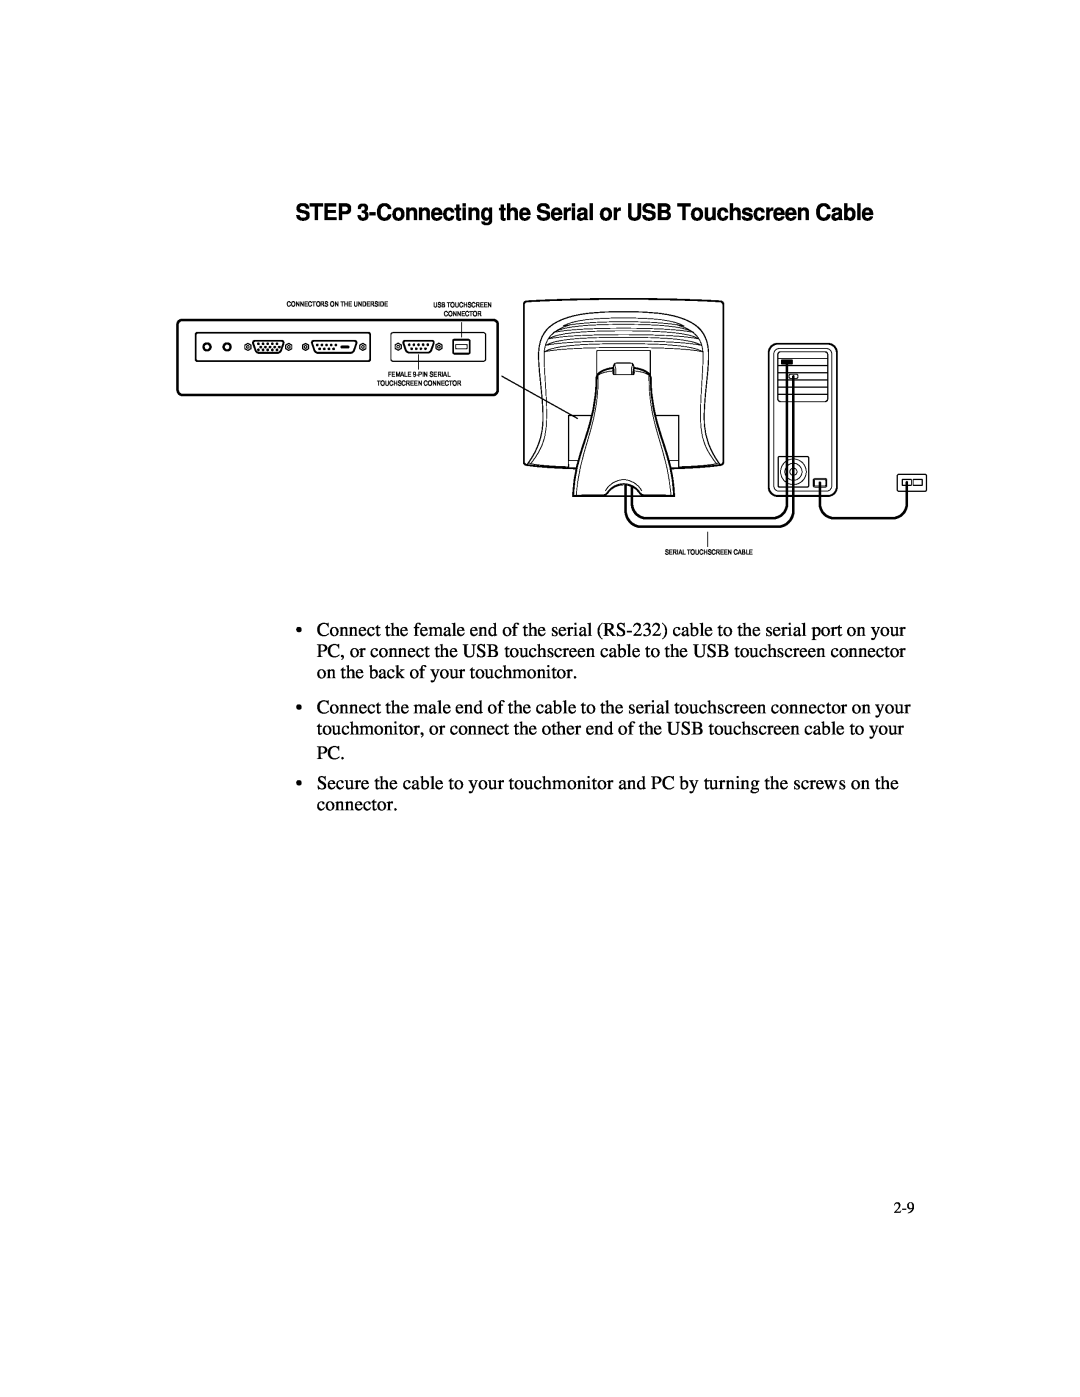 Elo TouchSystems 1827L, 1825L manual Connecting the Serial or USB Touchscreen Cable, Connectors On The Underside 